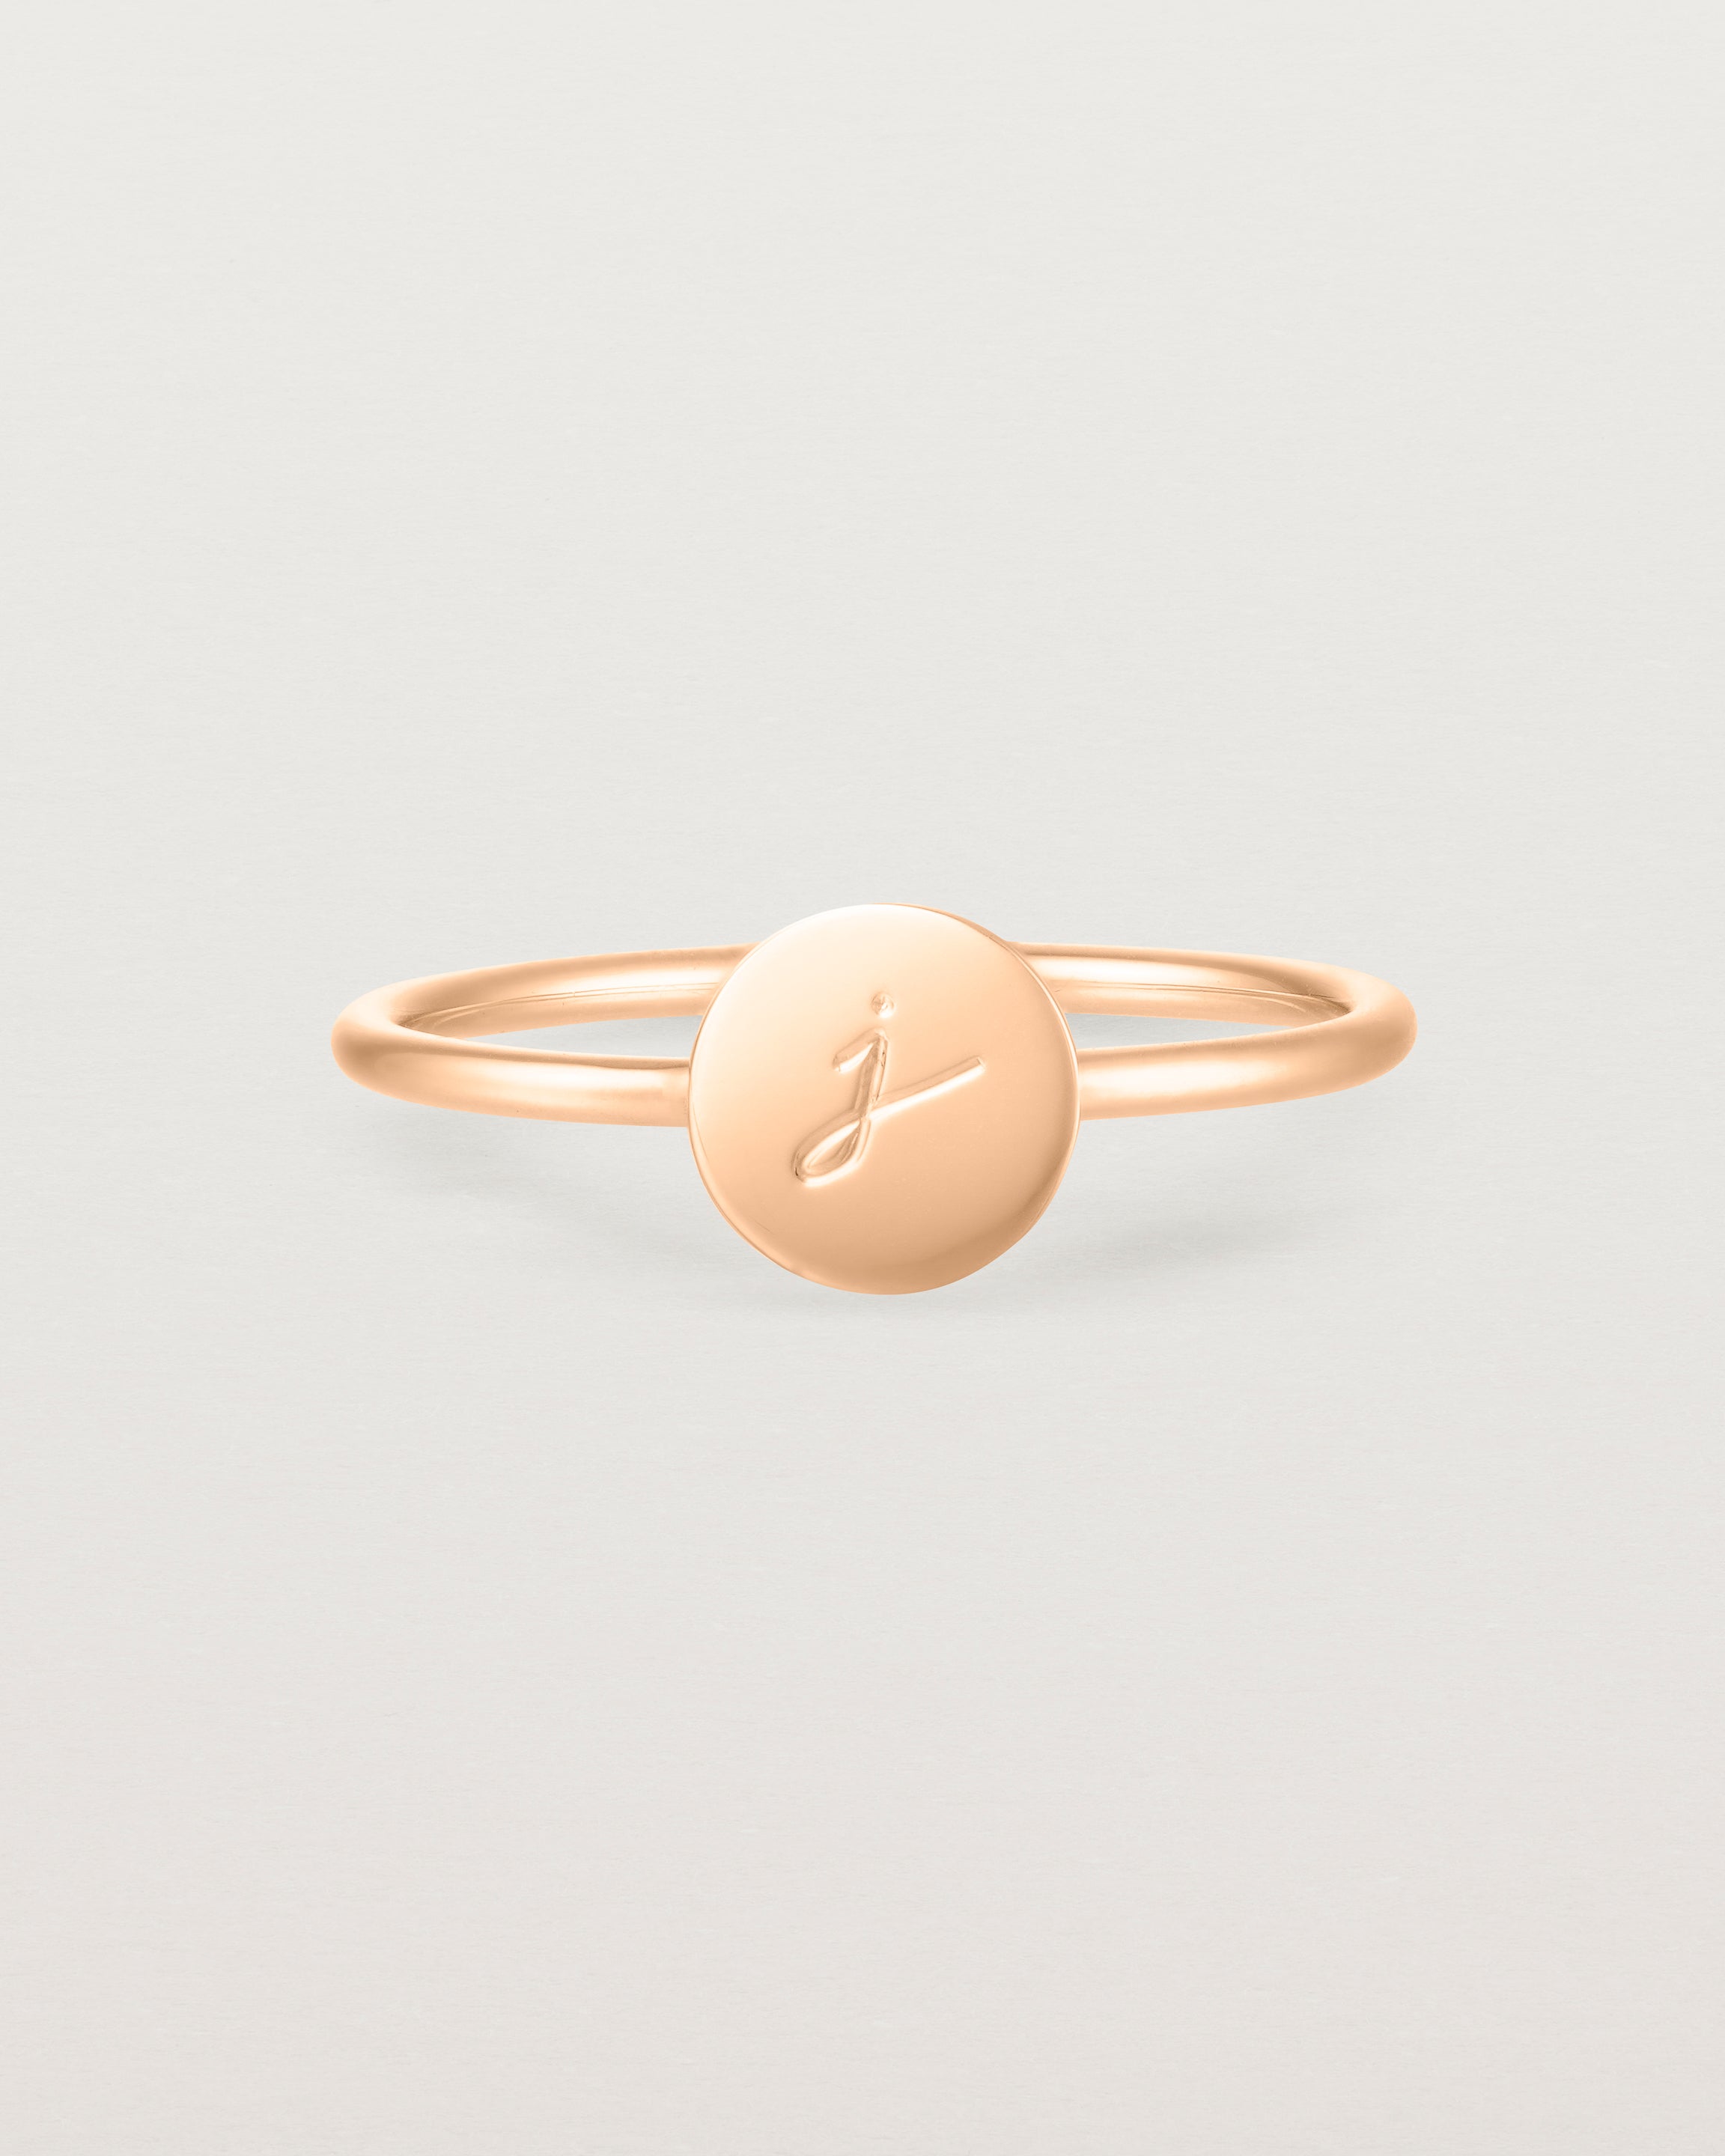 Front view of a rose gold ring featuring a disc with the letter j engraved